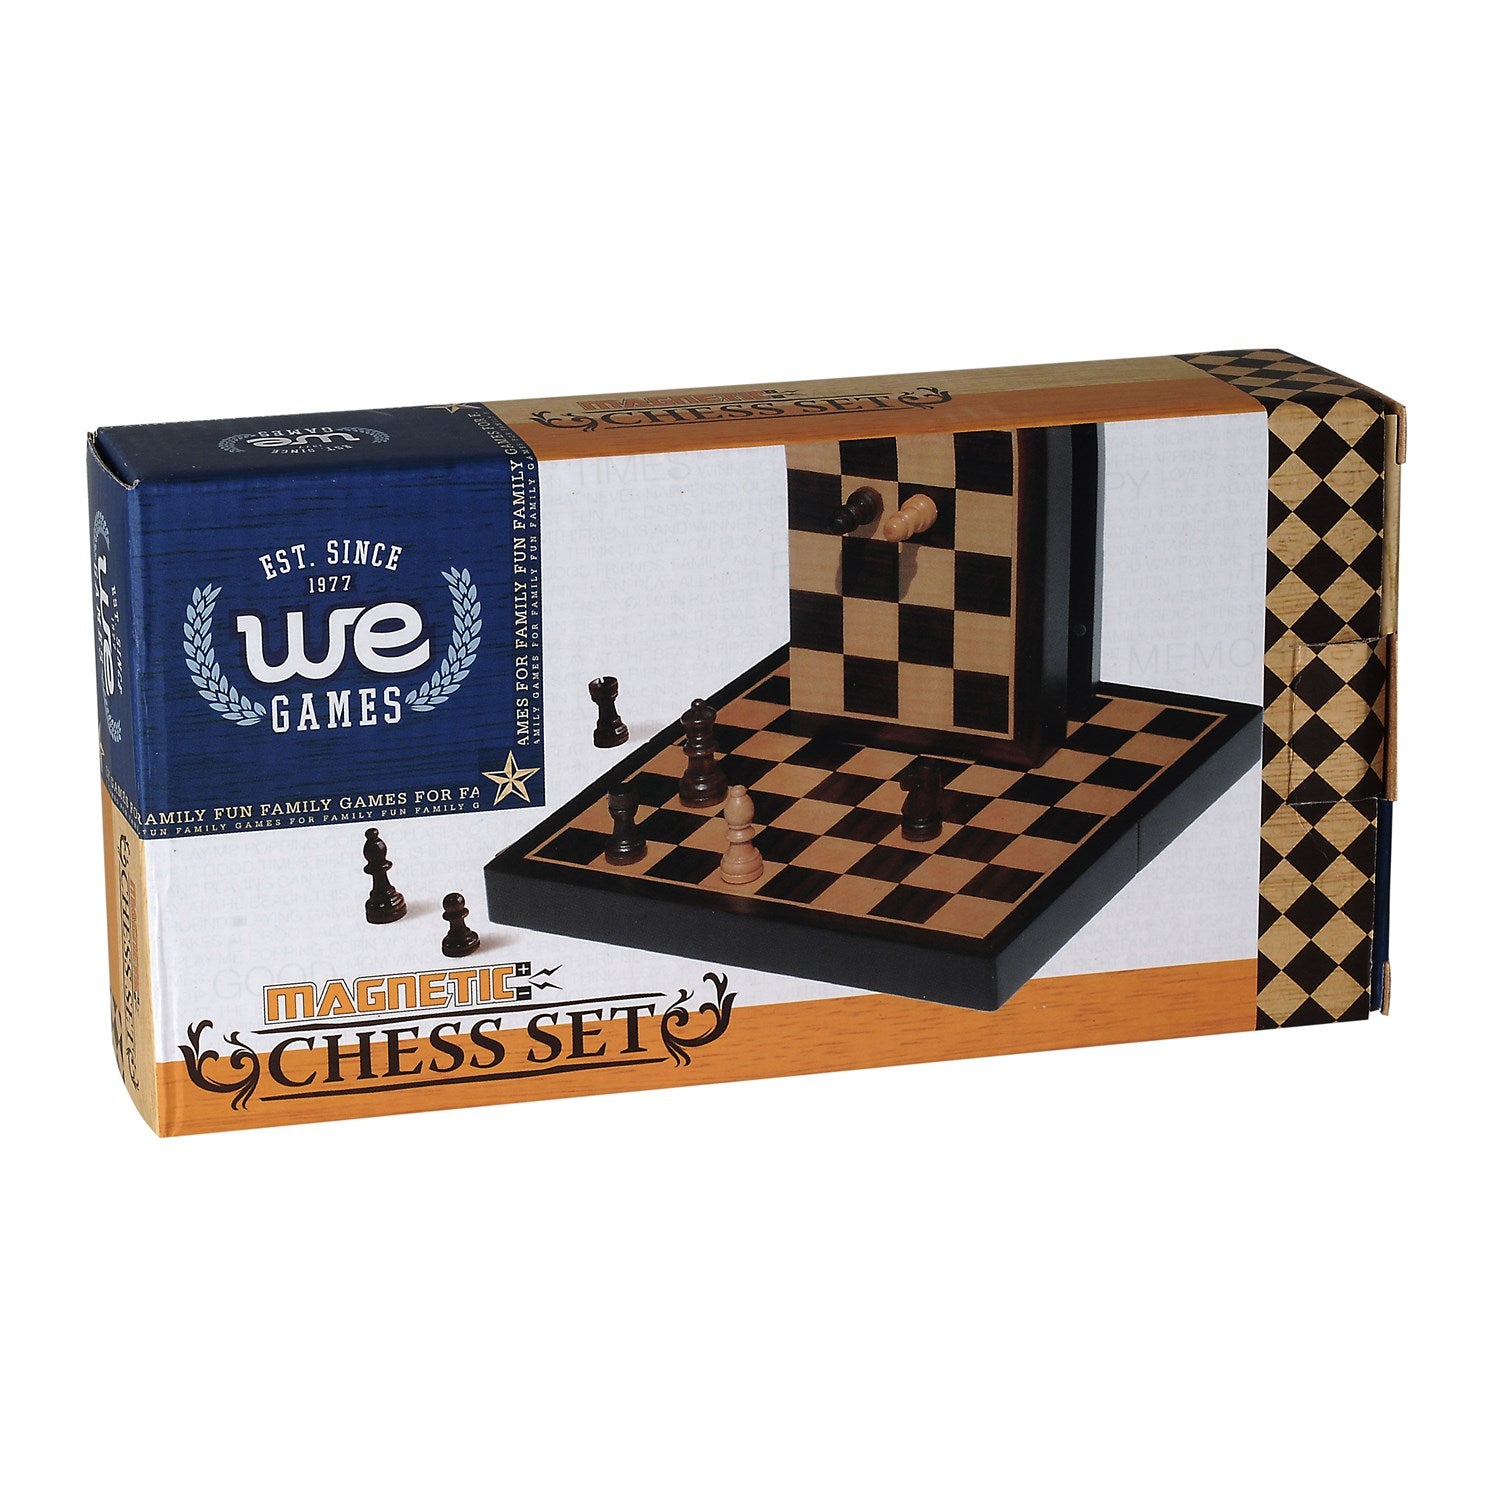 Craftgasmic Folding Magnetic Chess and Pieces, Set Wooden Board Travel  Games 10 inches